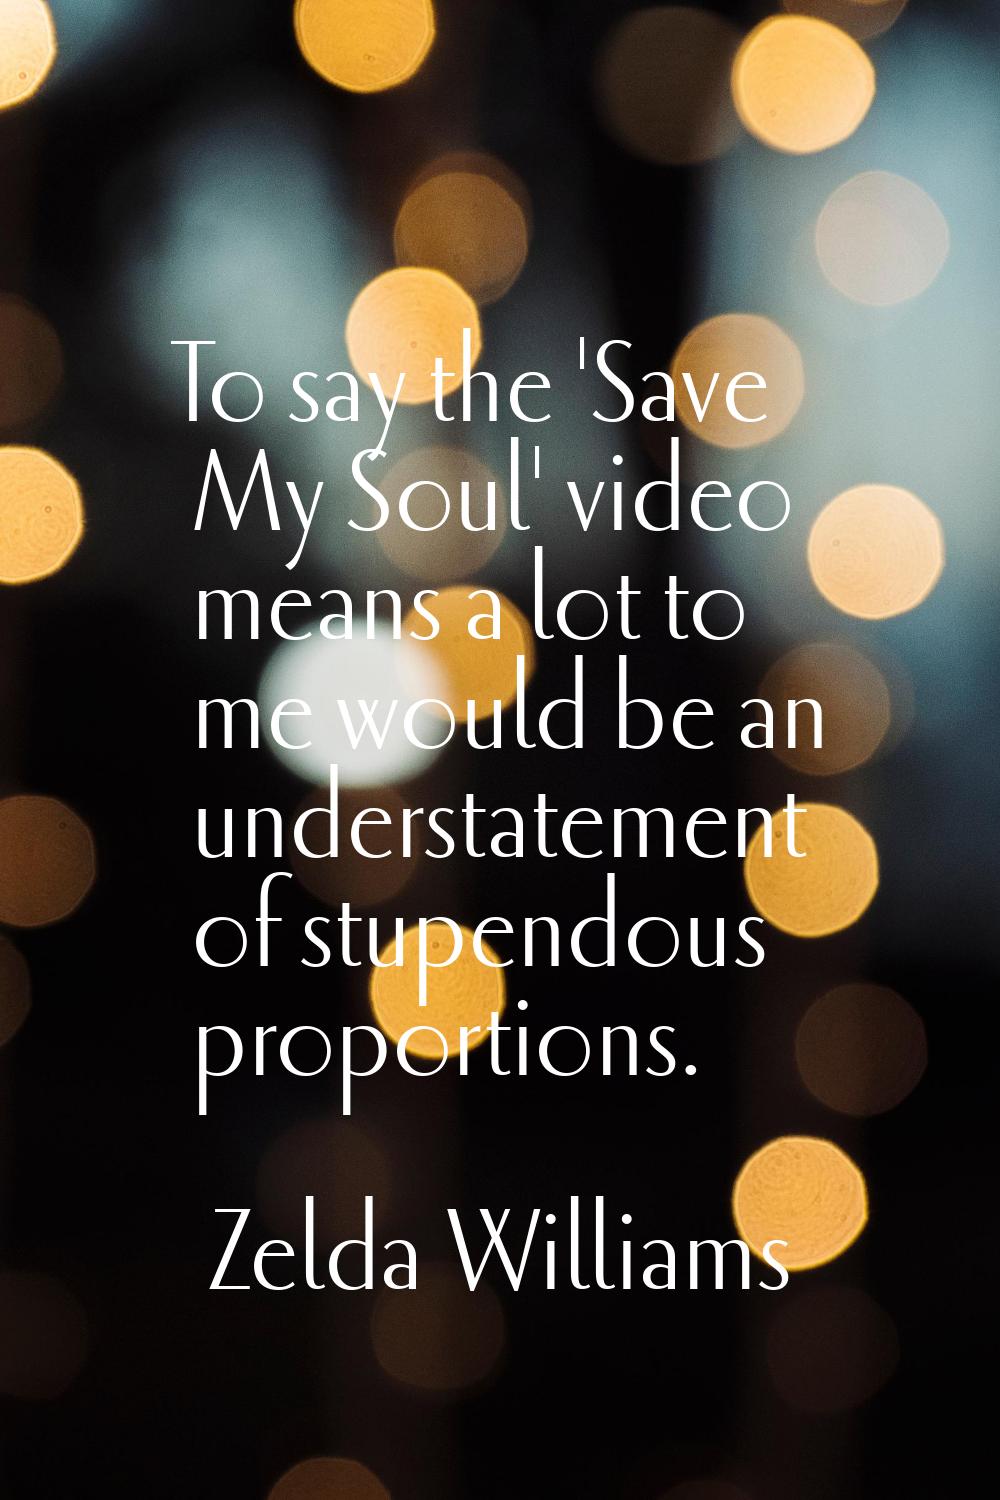 To say the 'Save My Soul' video means a lot to me would be an understatement of stupendous proporti